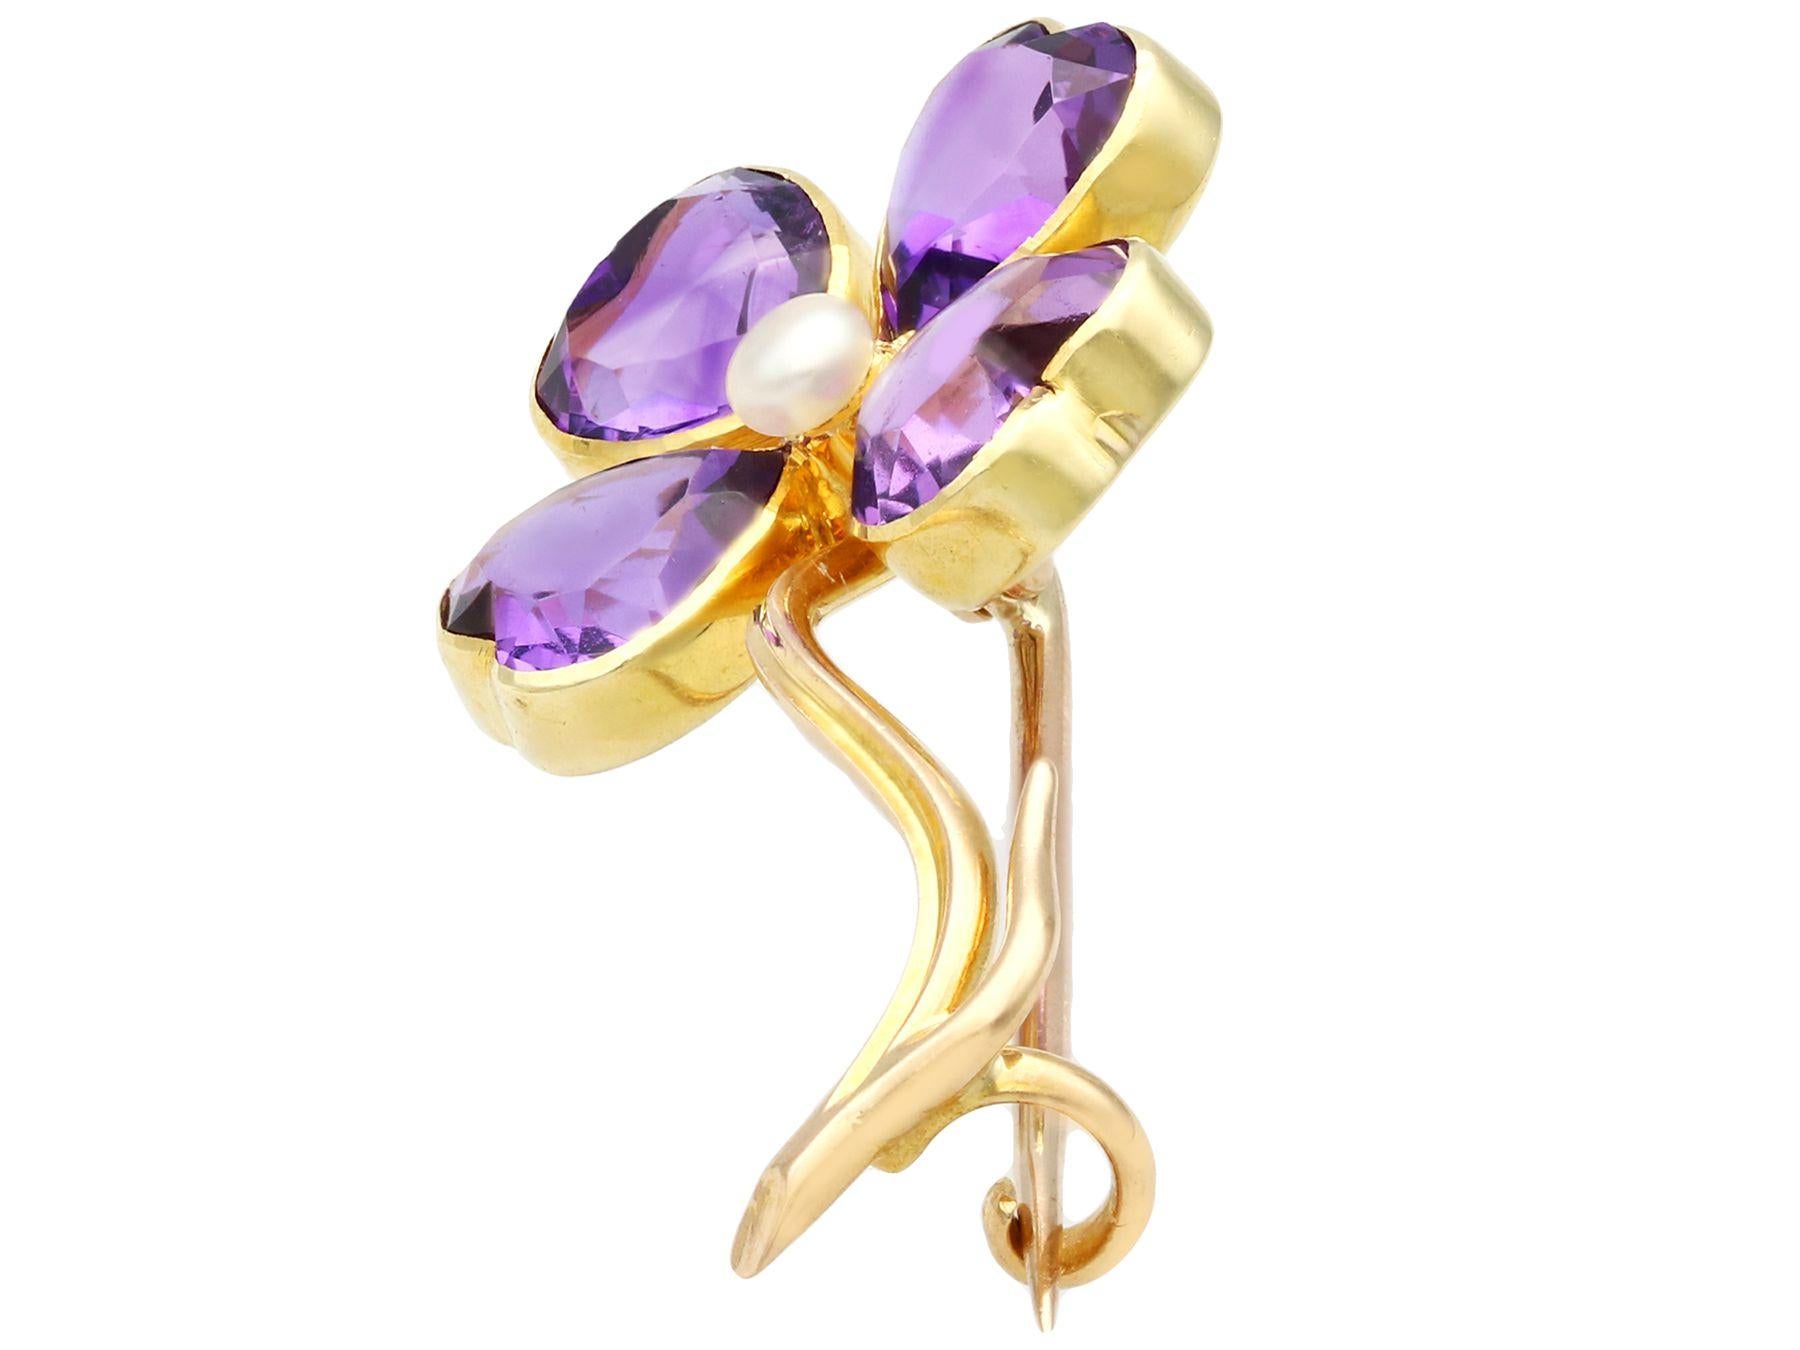 Heart Cut Antique 4.25 Carat Amethyst and Pearl 15k Yellow Gold Four-Leaf Clover Brooch For Sale